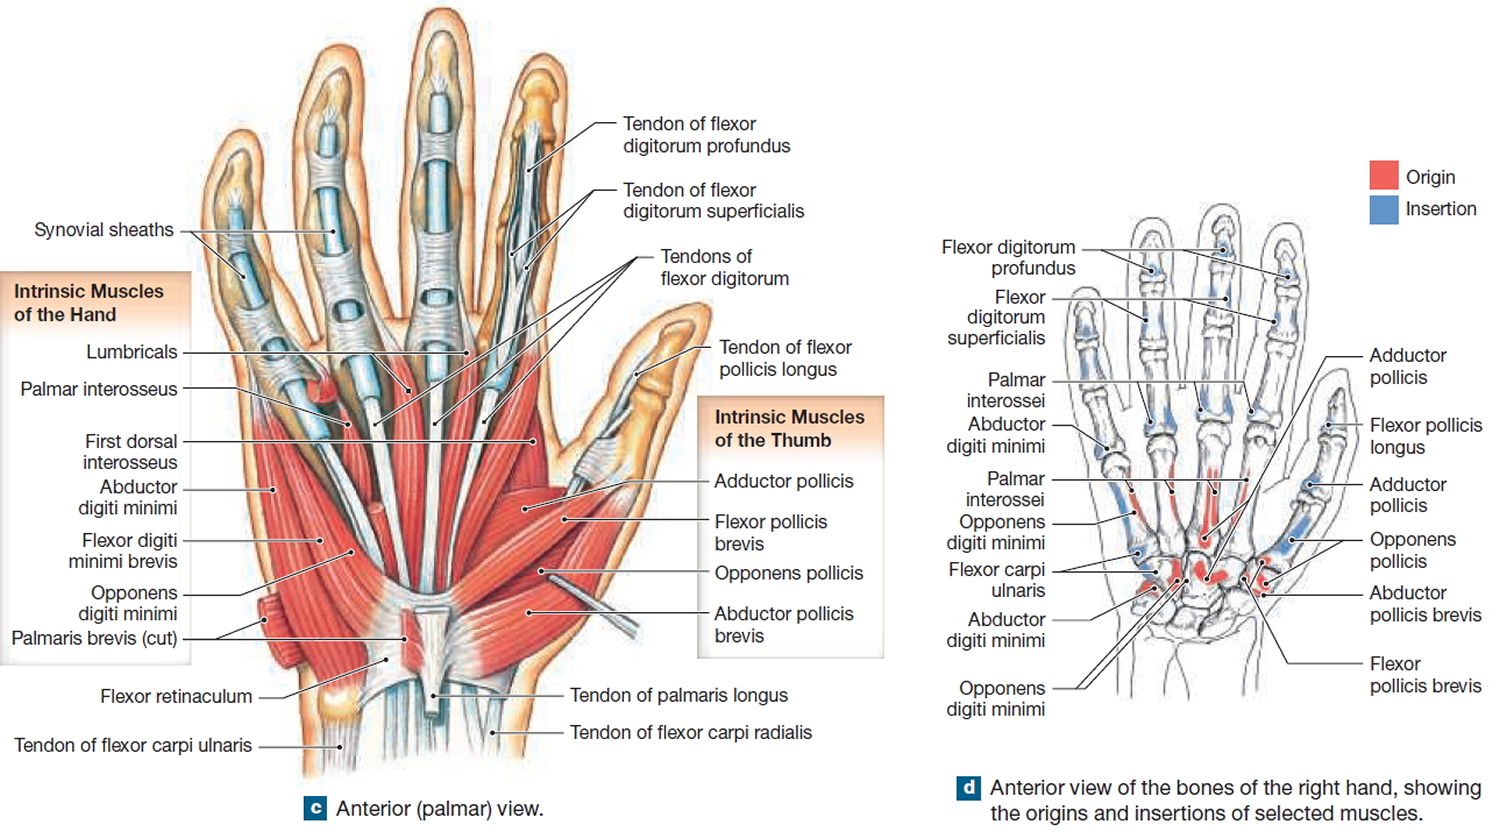 muscles of the hand - back view